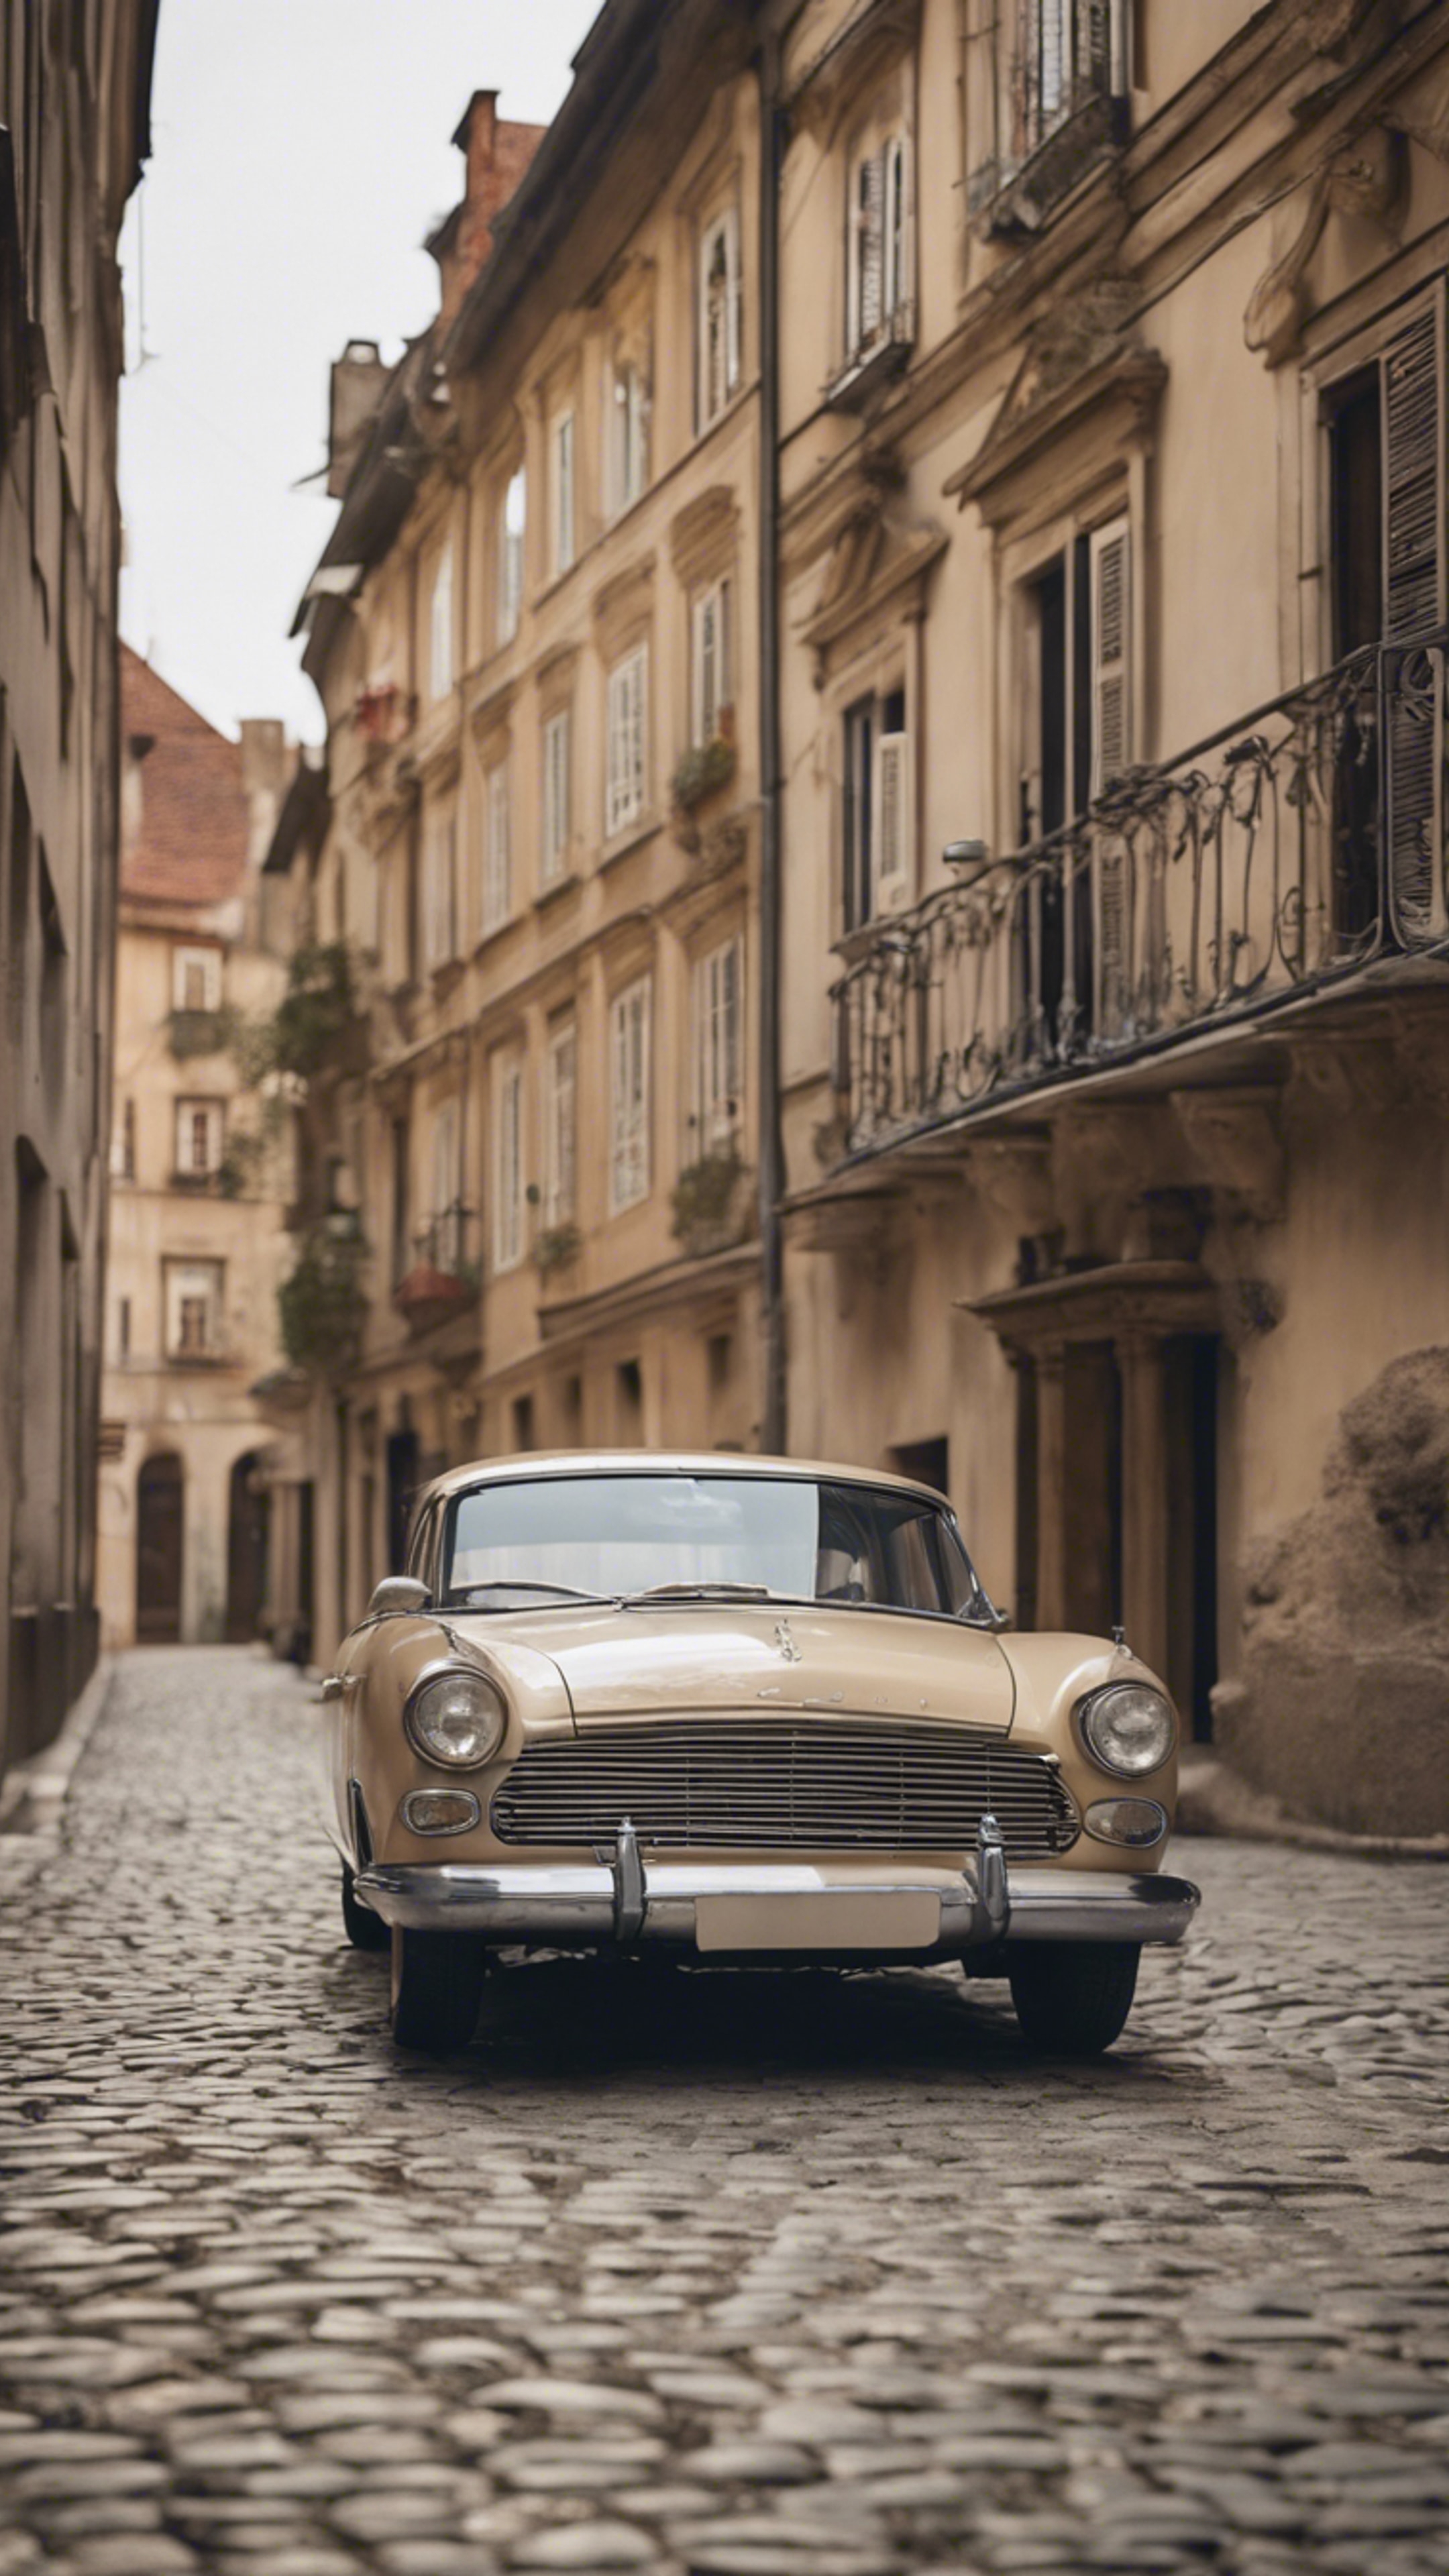 A beige classic car parked on a cobblestone street with rustic buildings in the background. Шпалери[31a873a8b96b4be69c6a]